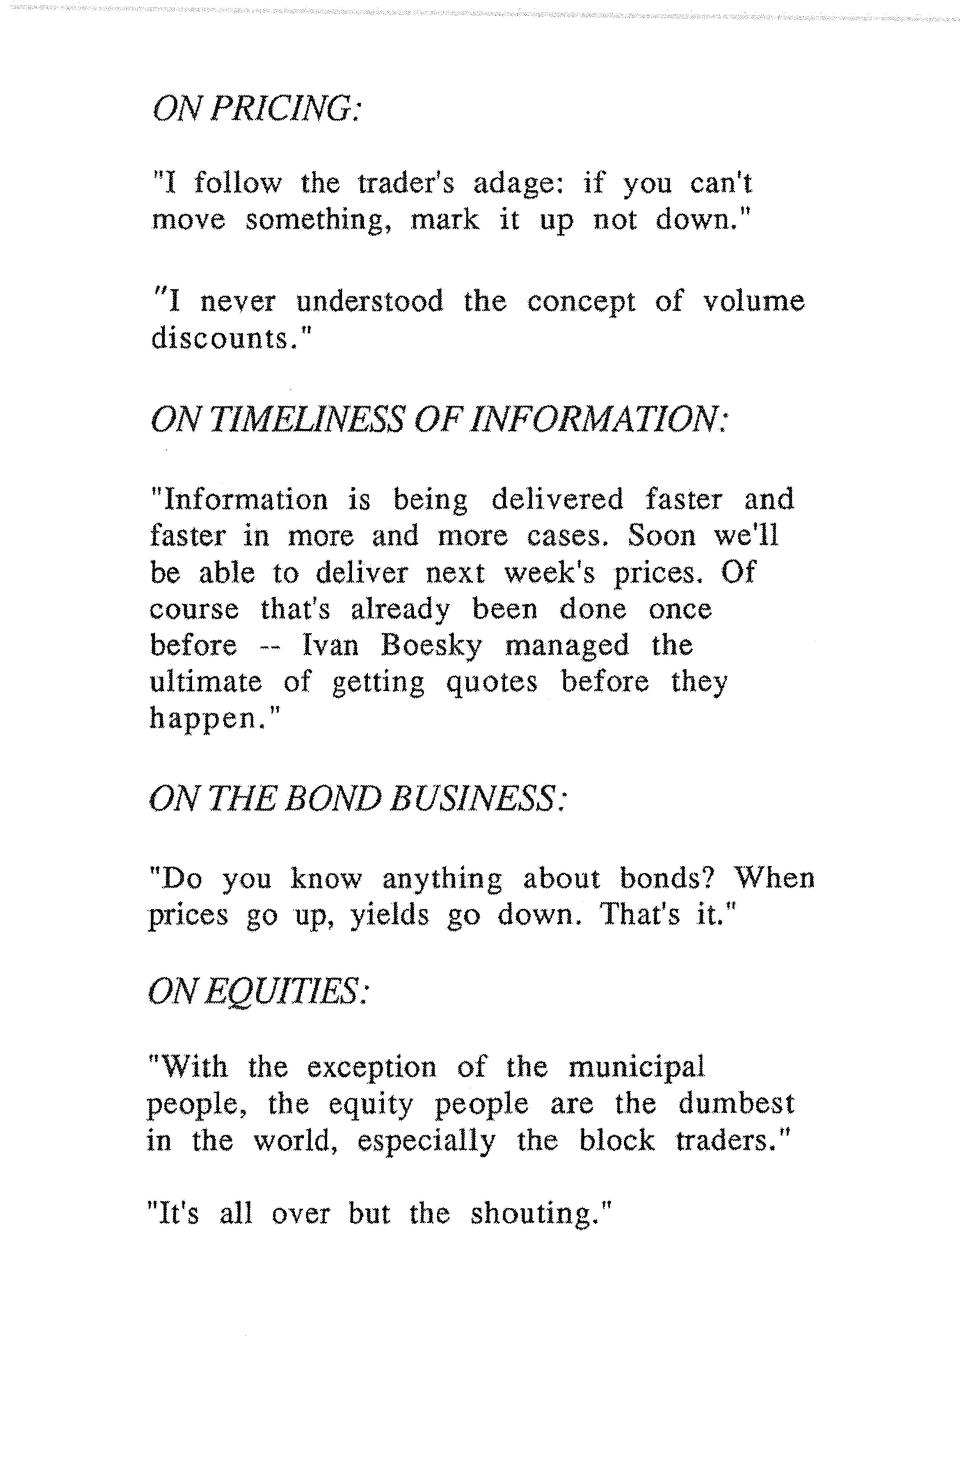 Page 11, The Portable Bloomberg